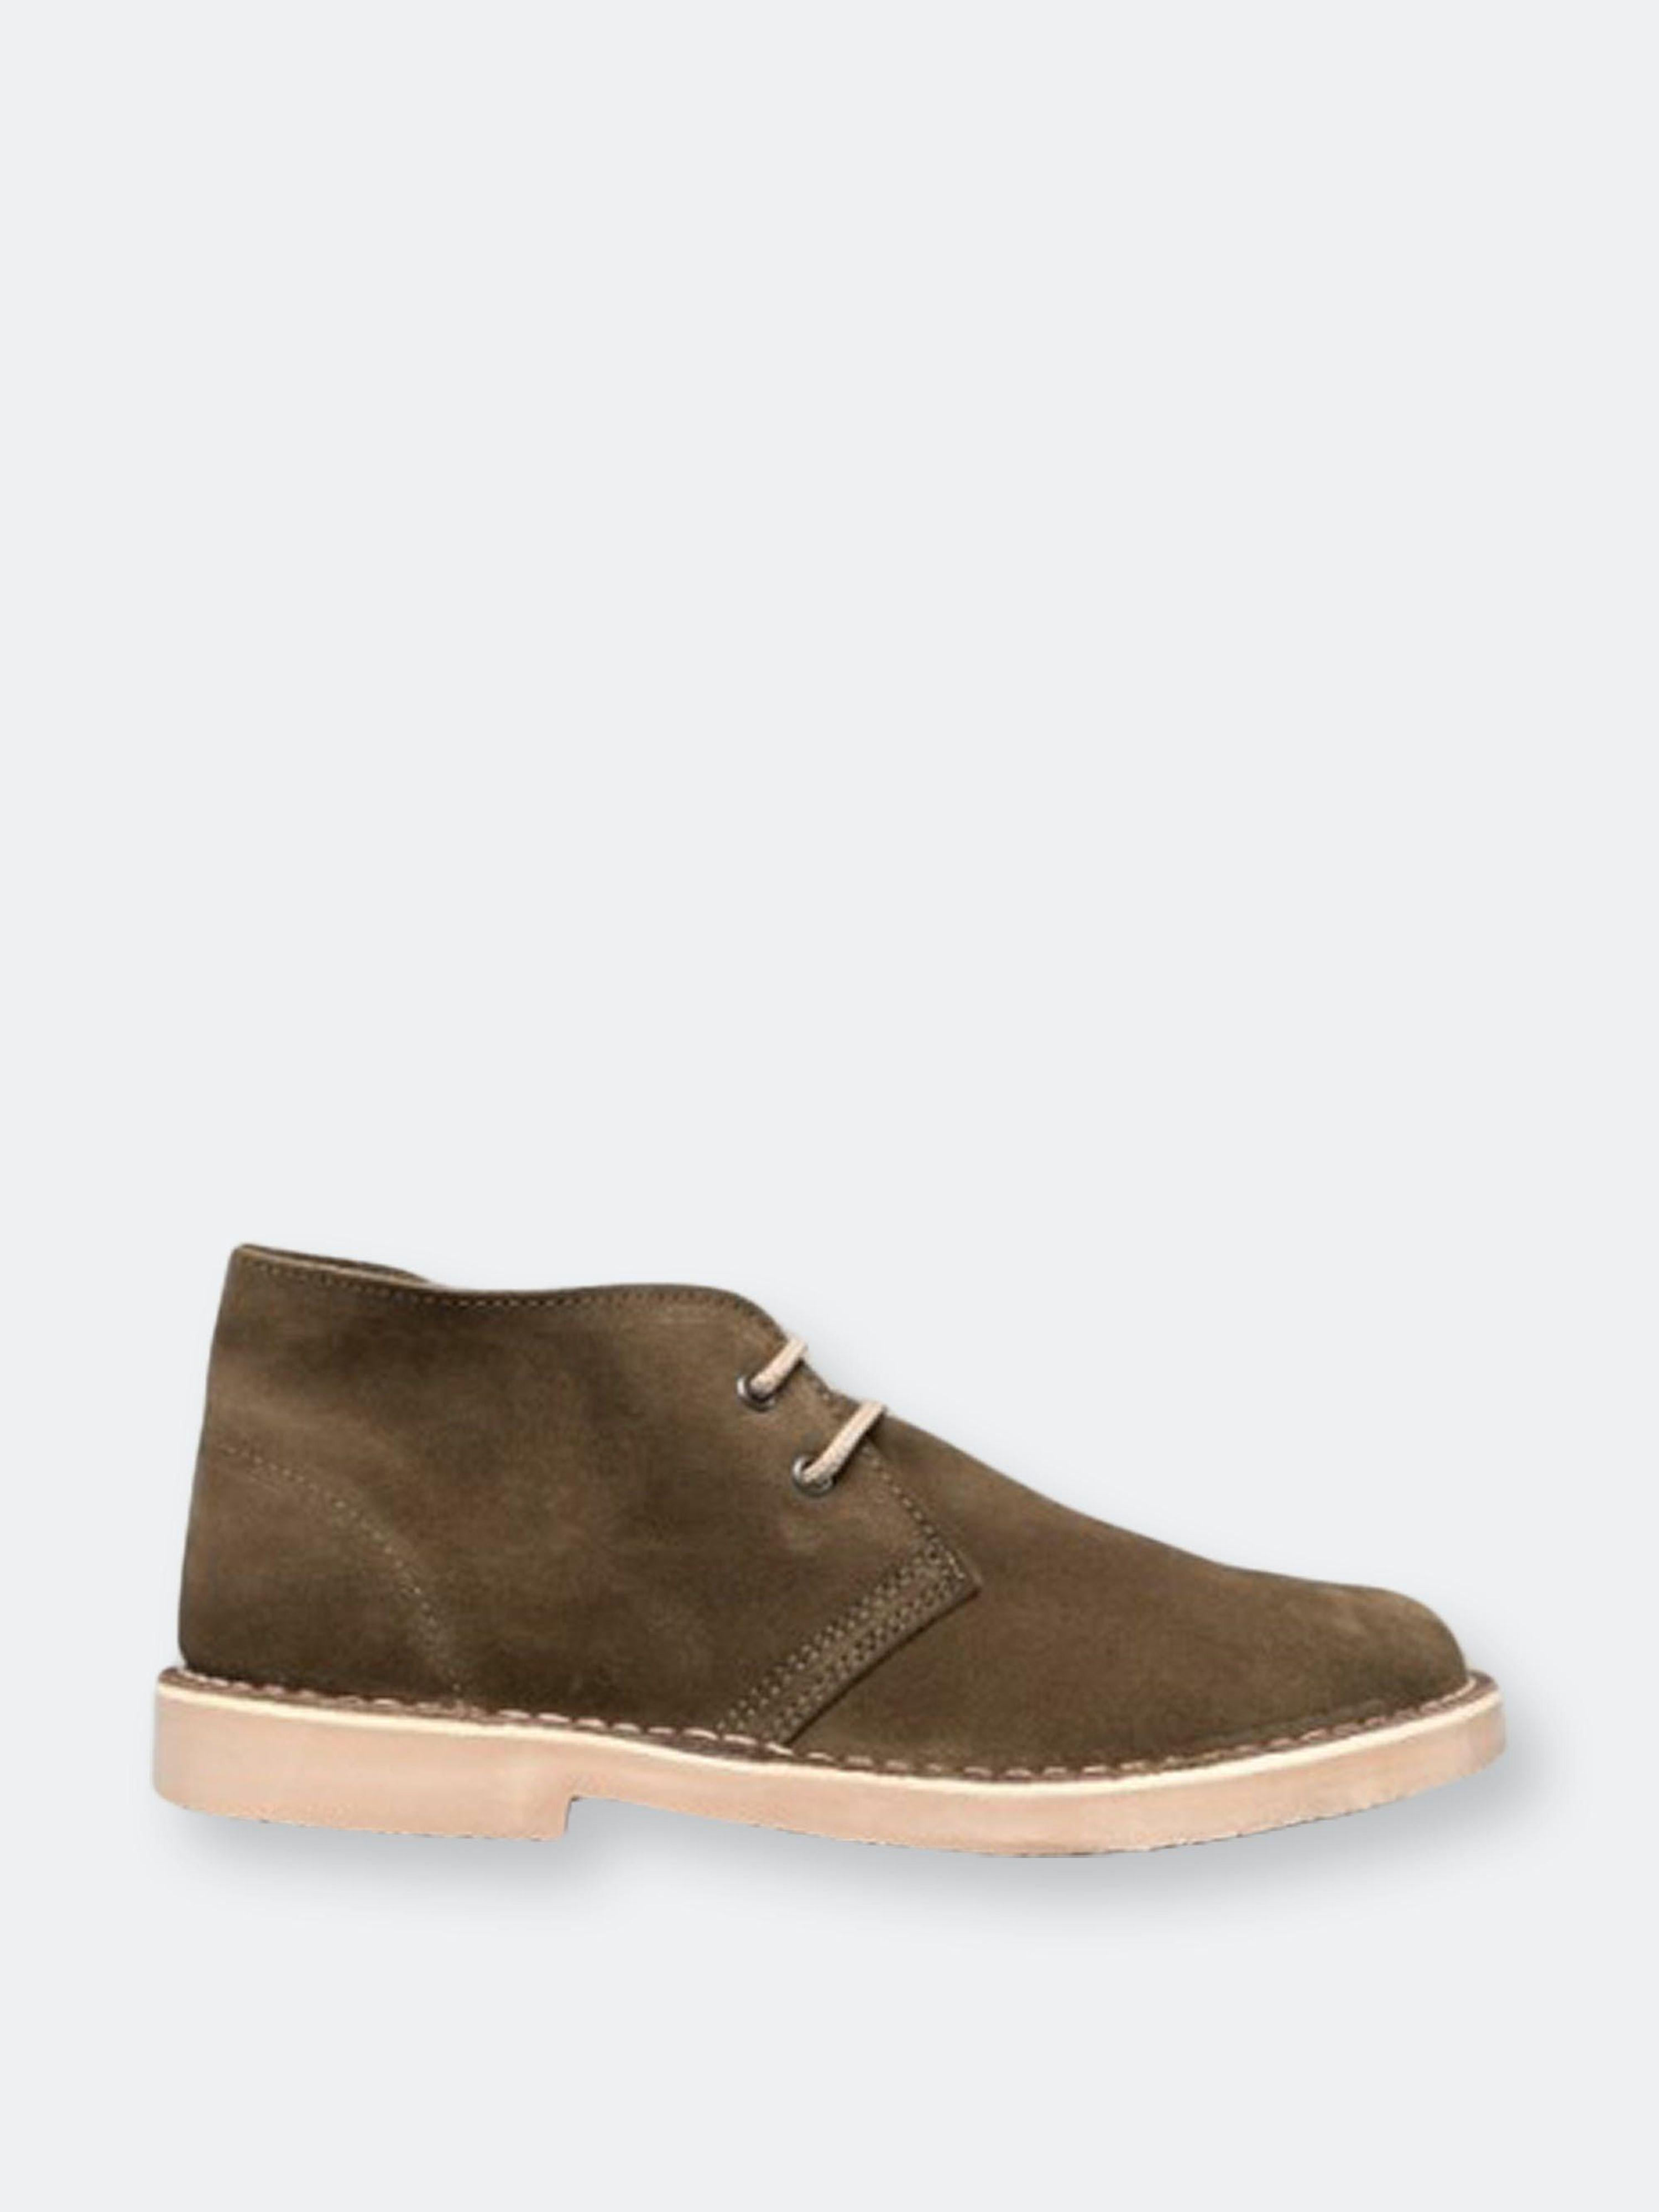 Roamers Real Suede Round Toe Unlined Desert Boots in Green | Lyst